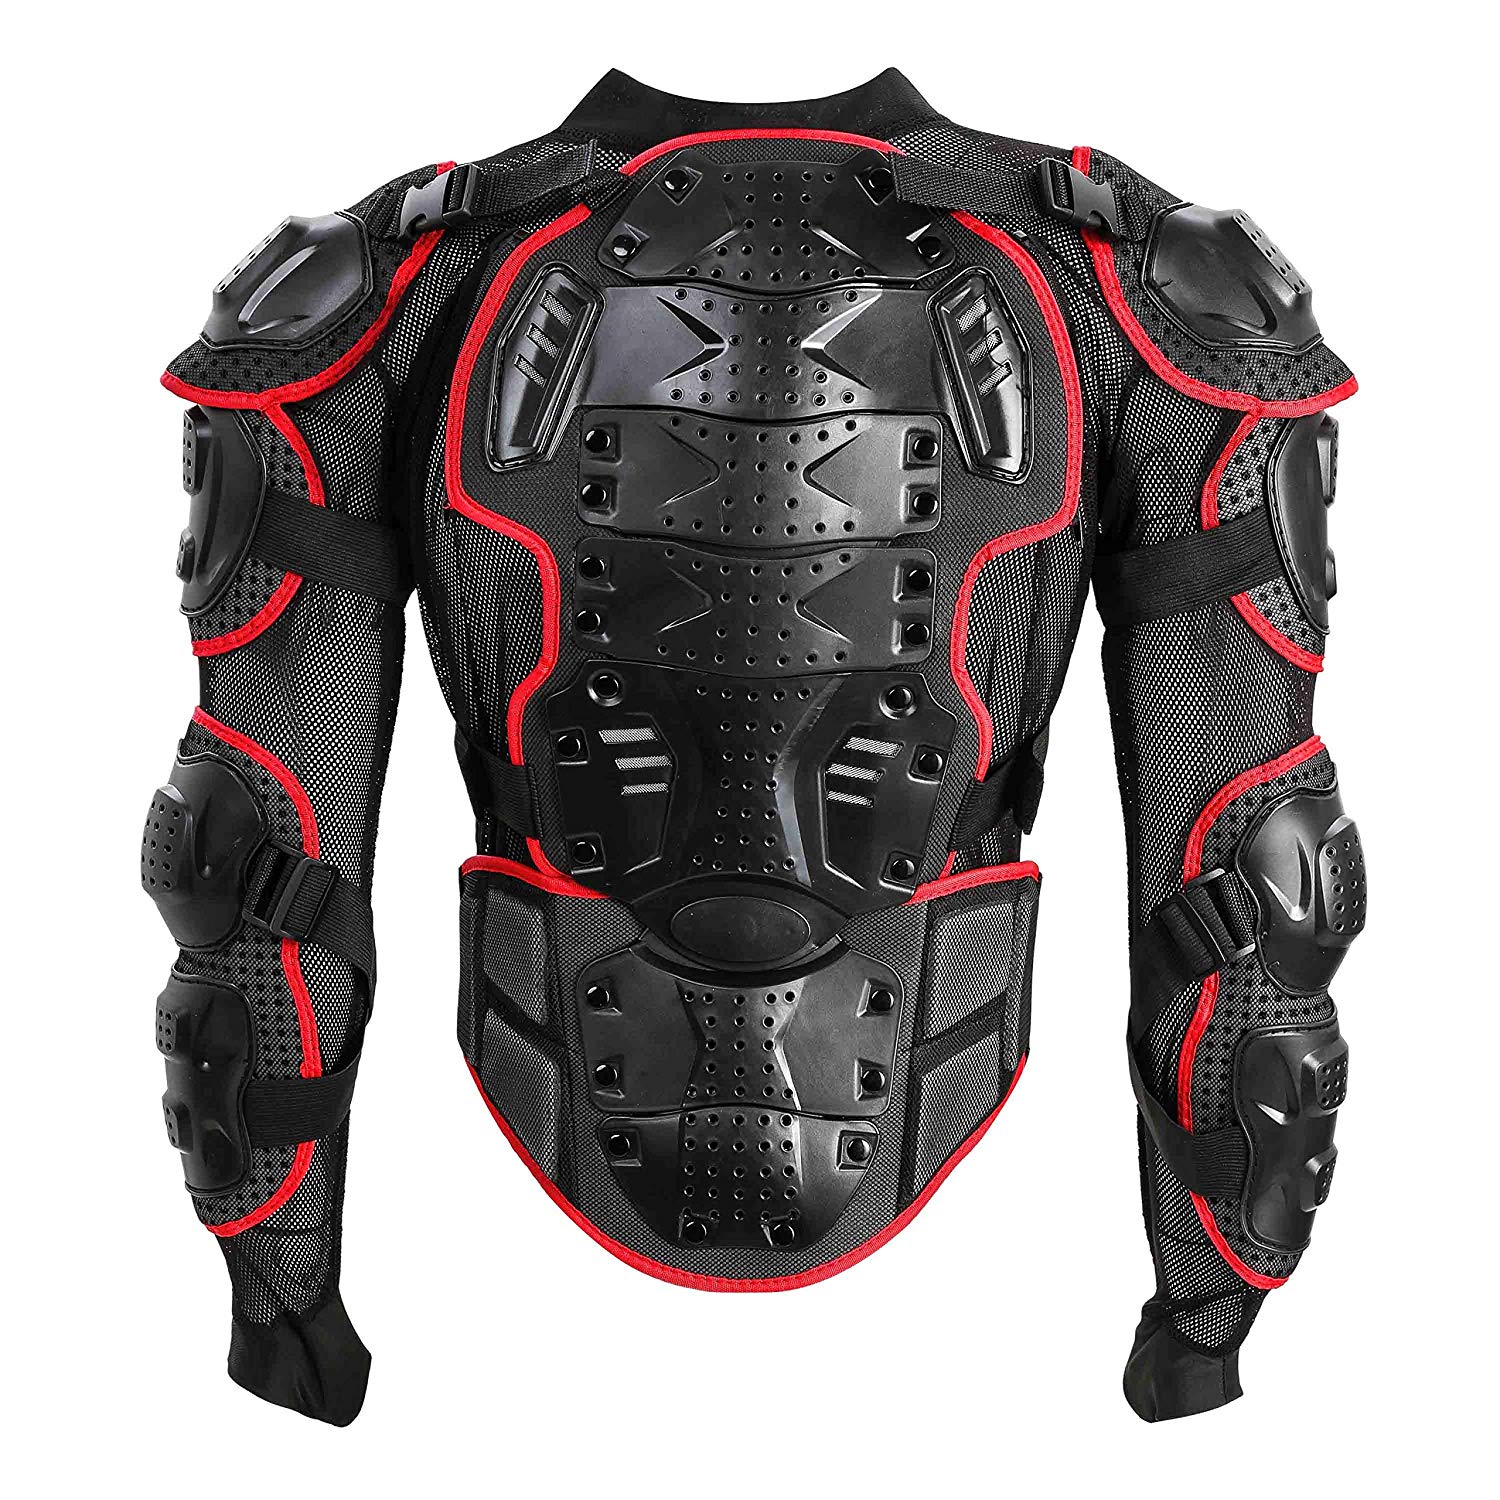 Motorcycle Riding Armor Jacket Body Protective Gear – CTHOPER